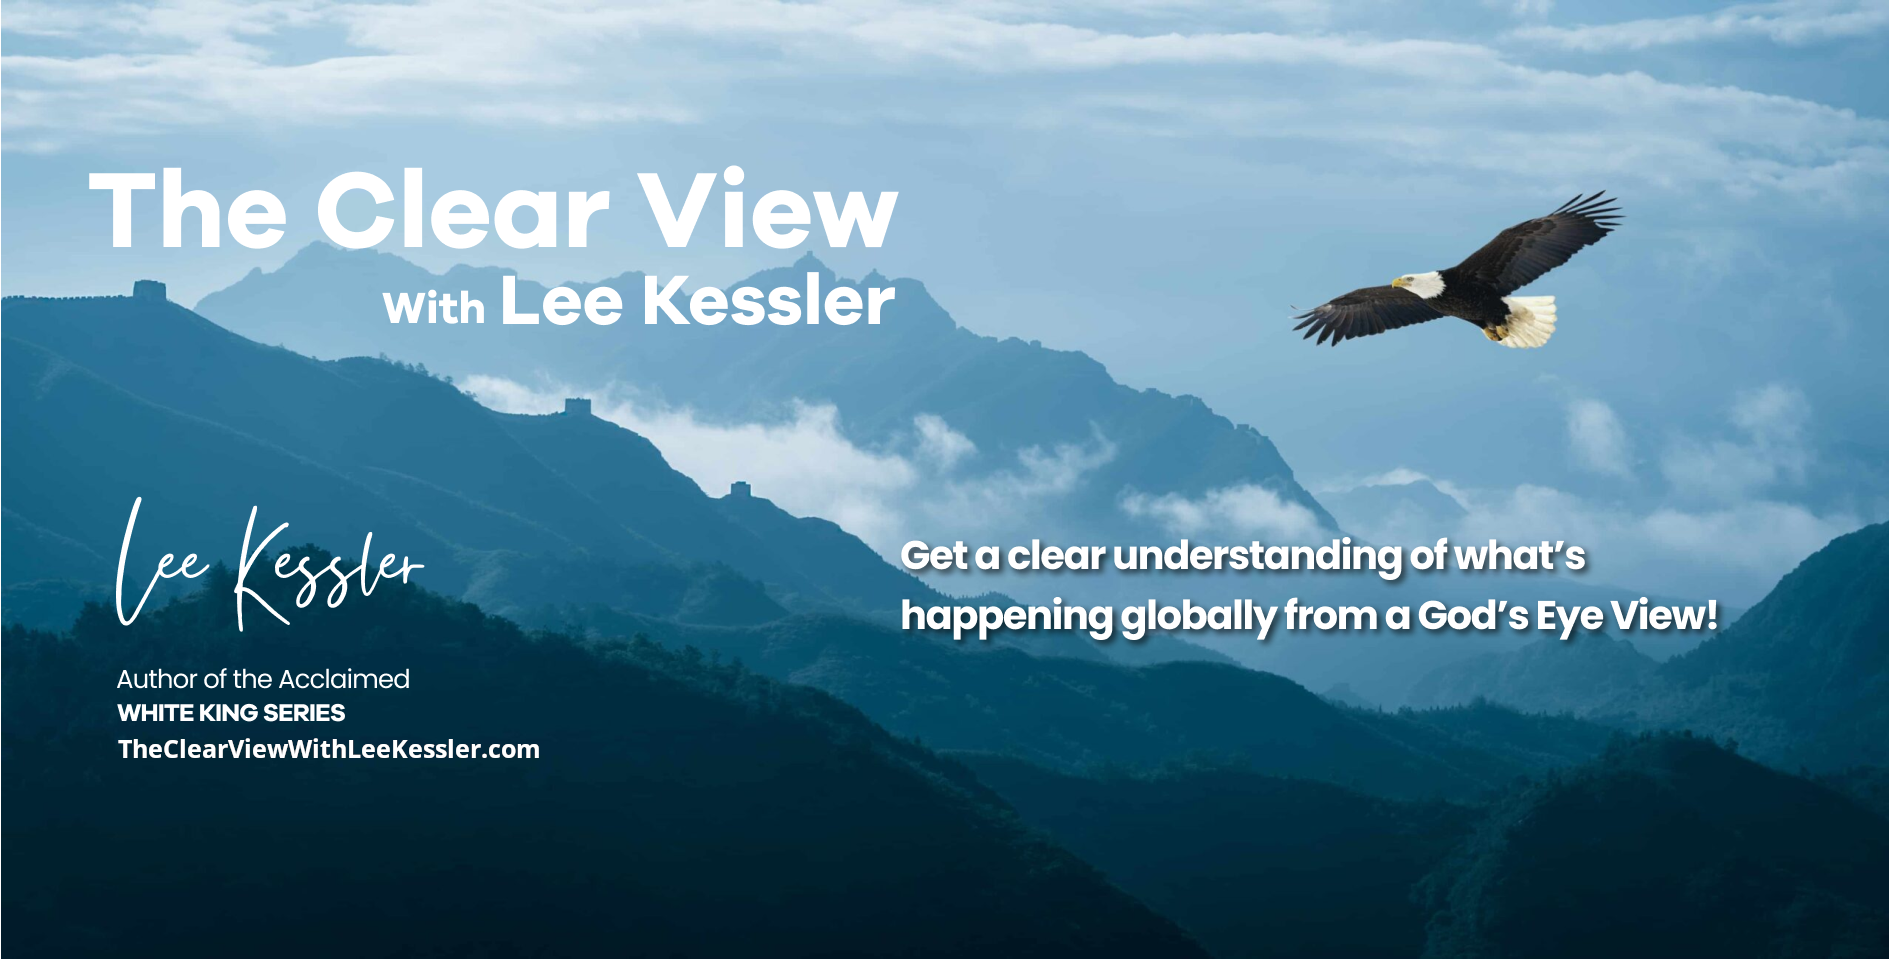 The Clear View with Lee Kessler